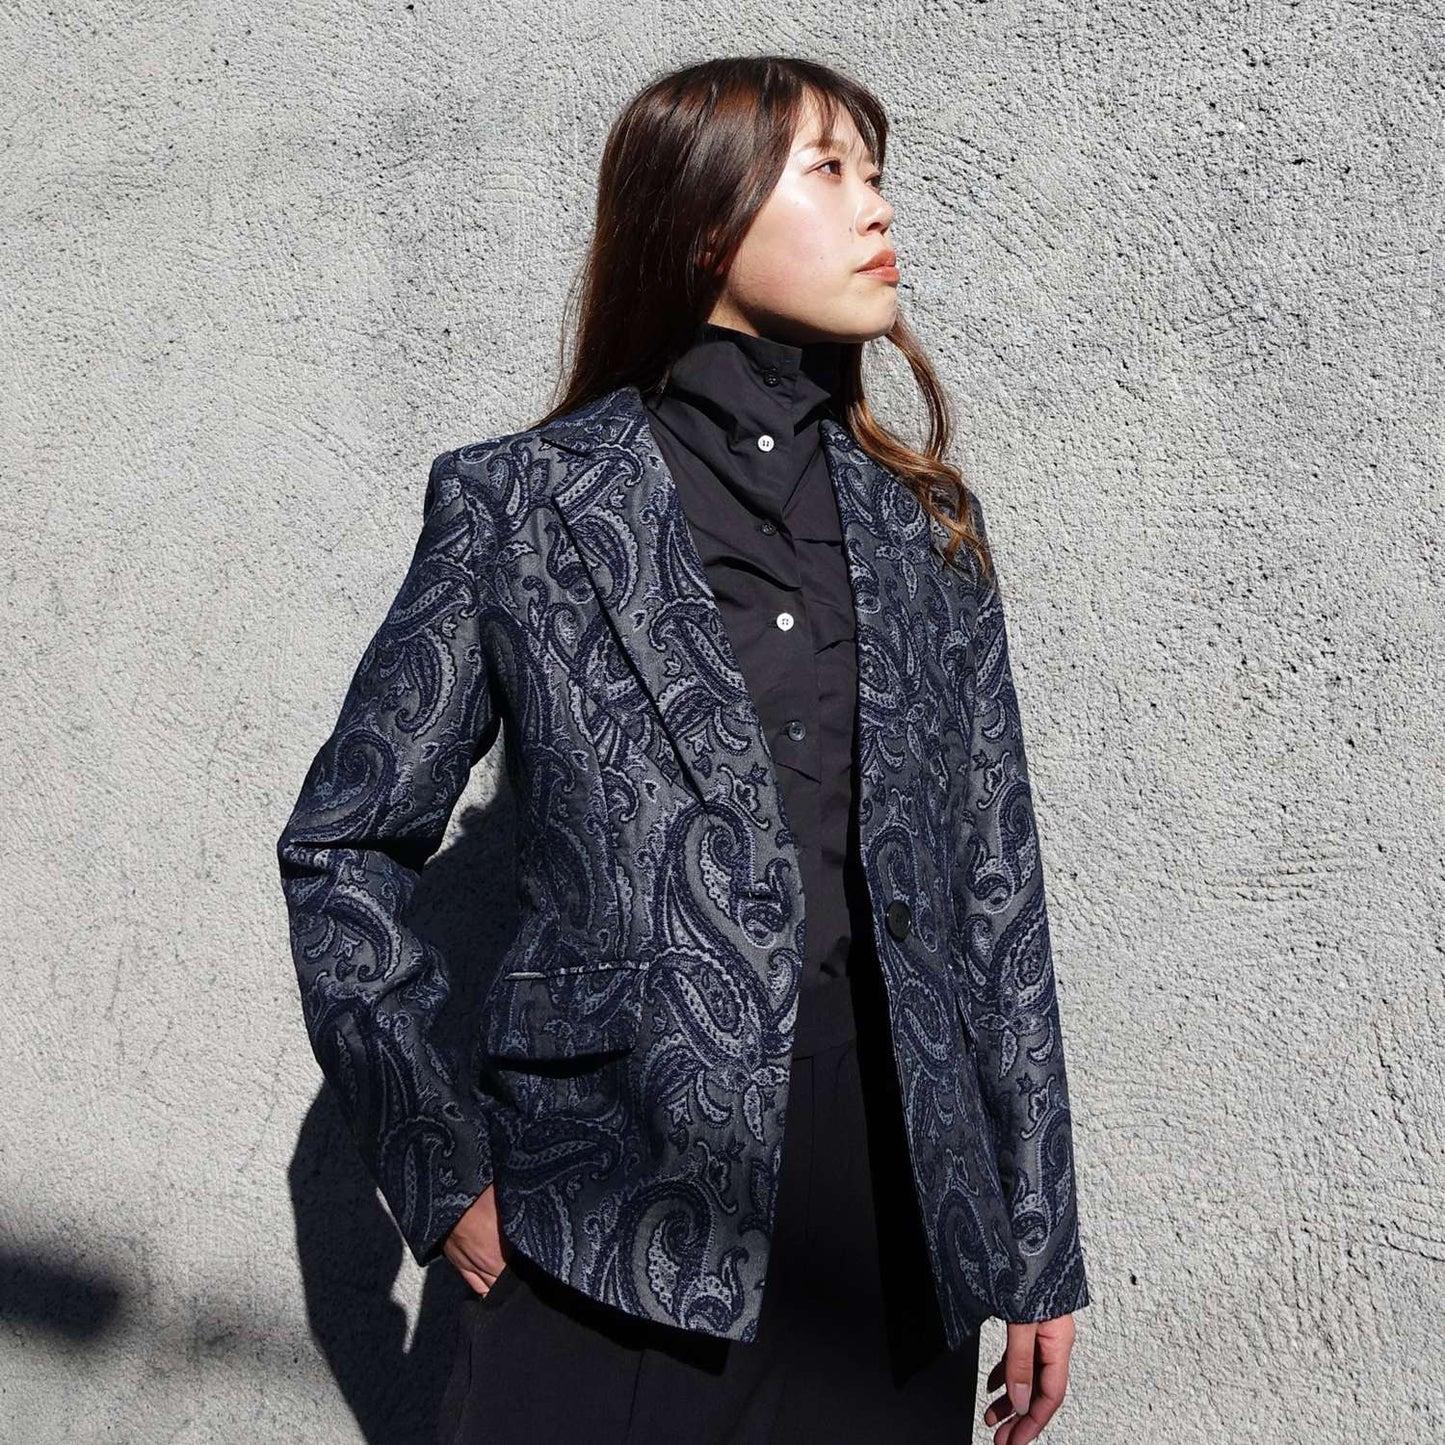 Tailored Jacket in Navy Paisley